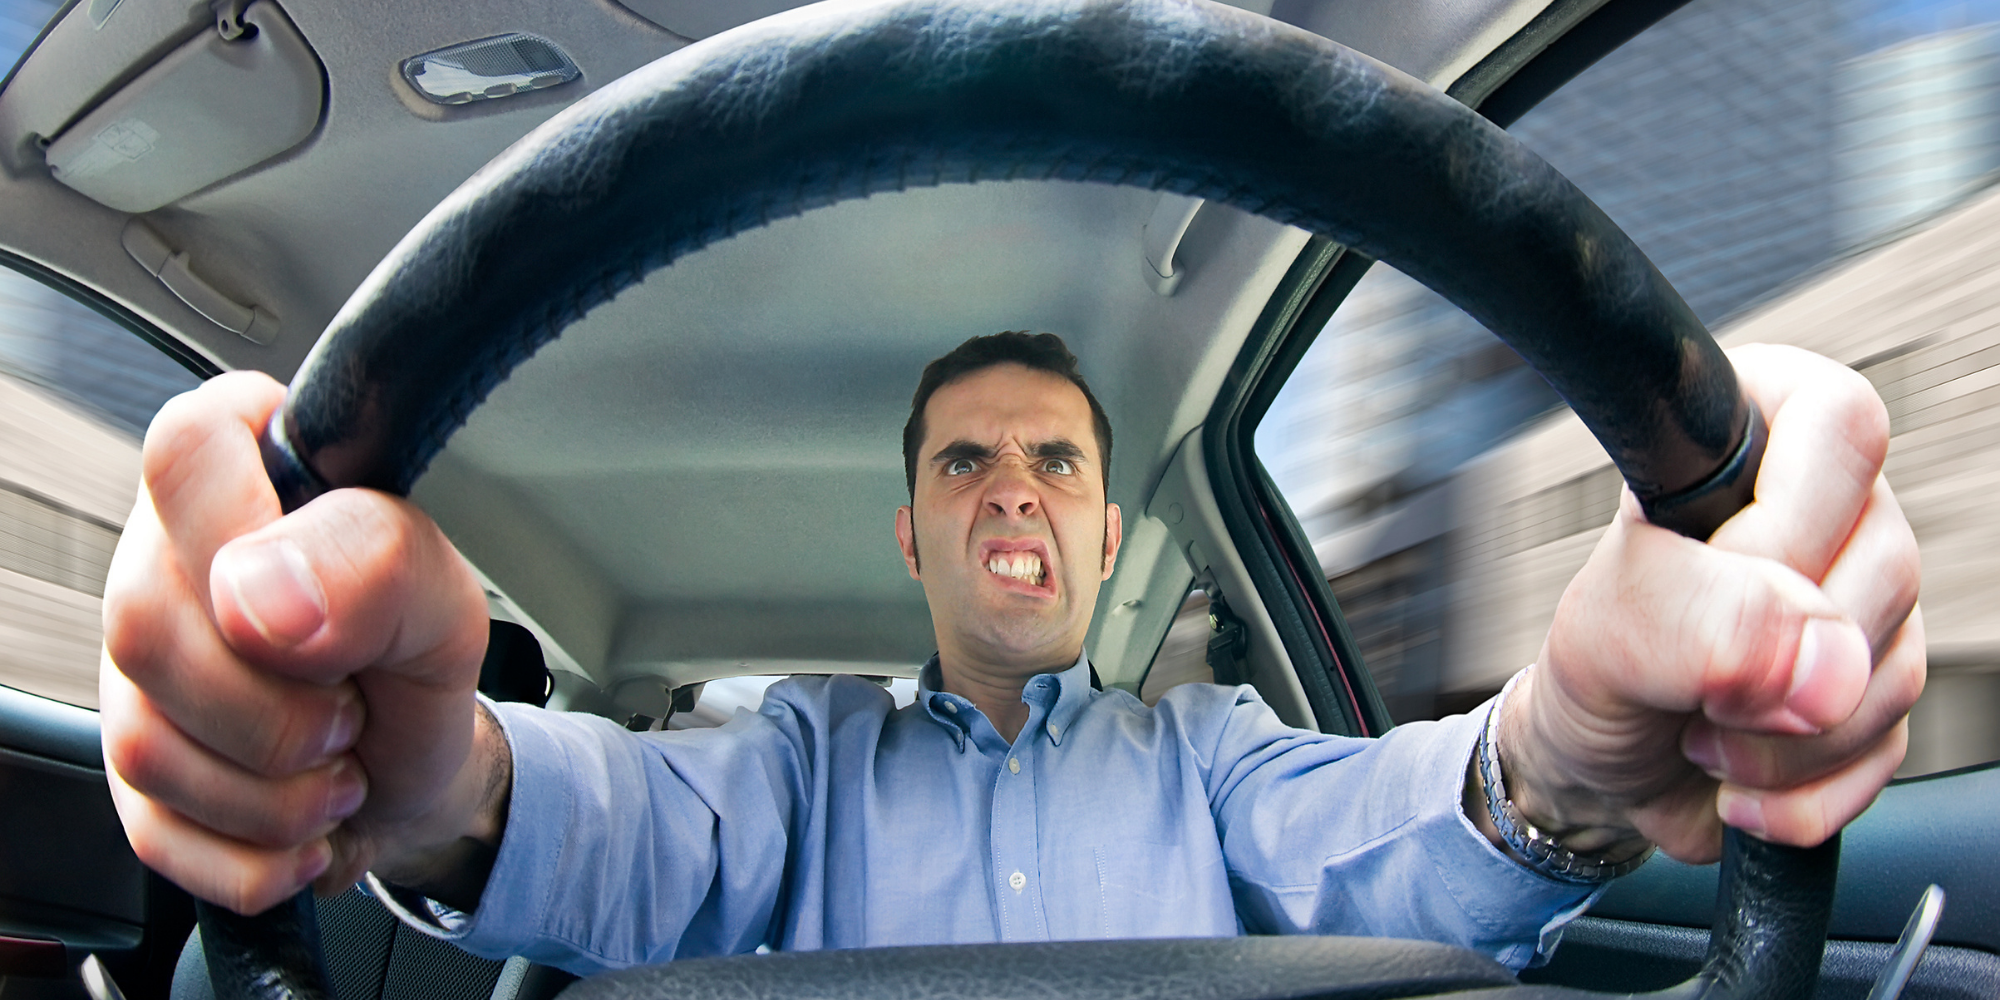 A Constant State of Road Rage: Politics, Power, and Jesus